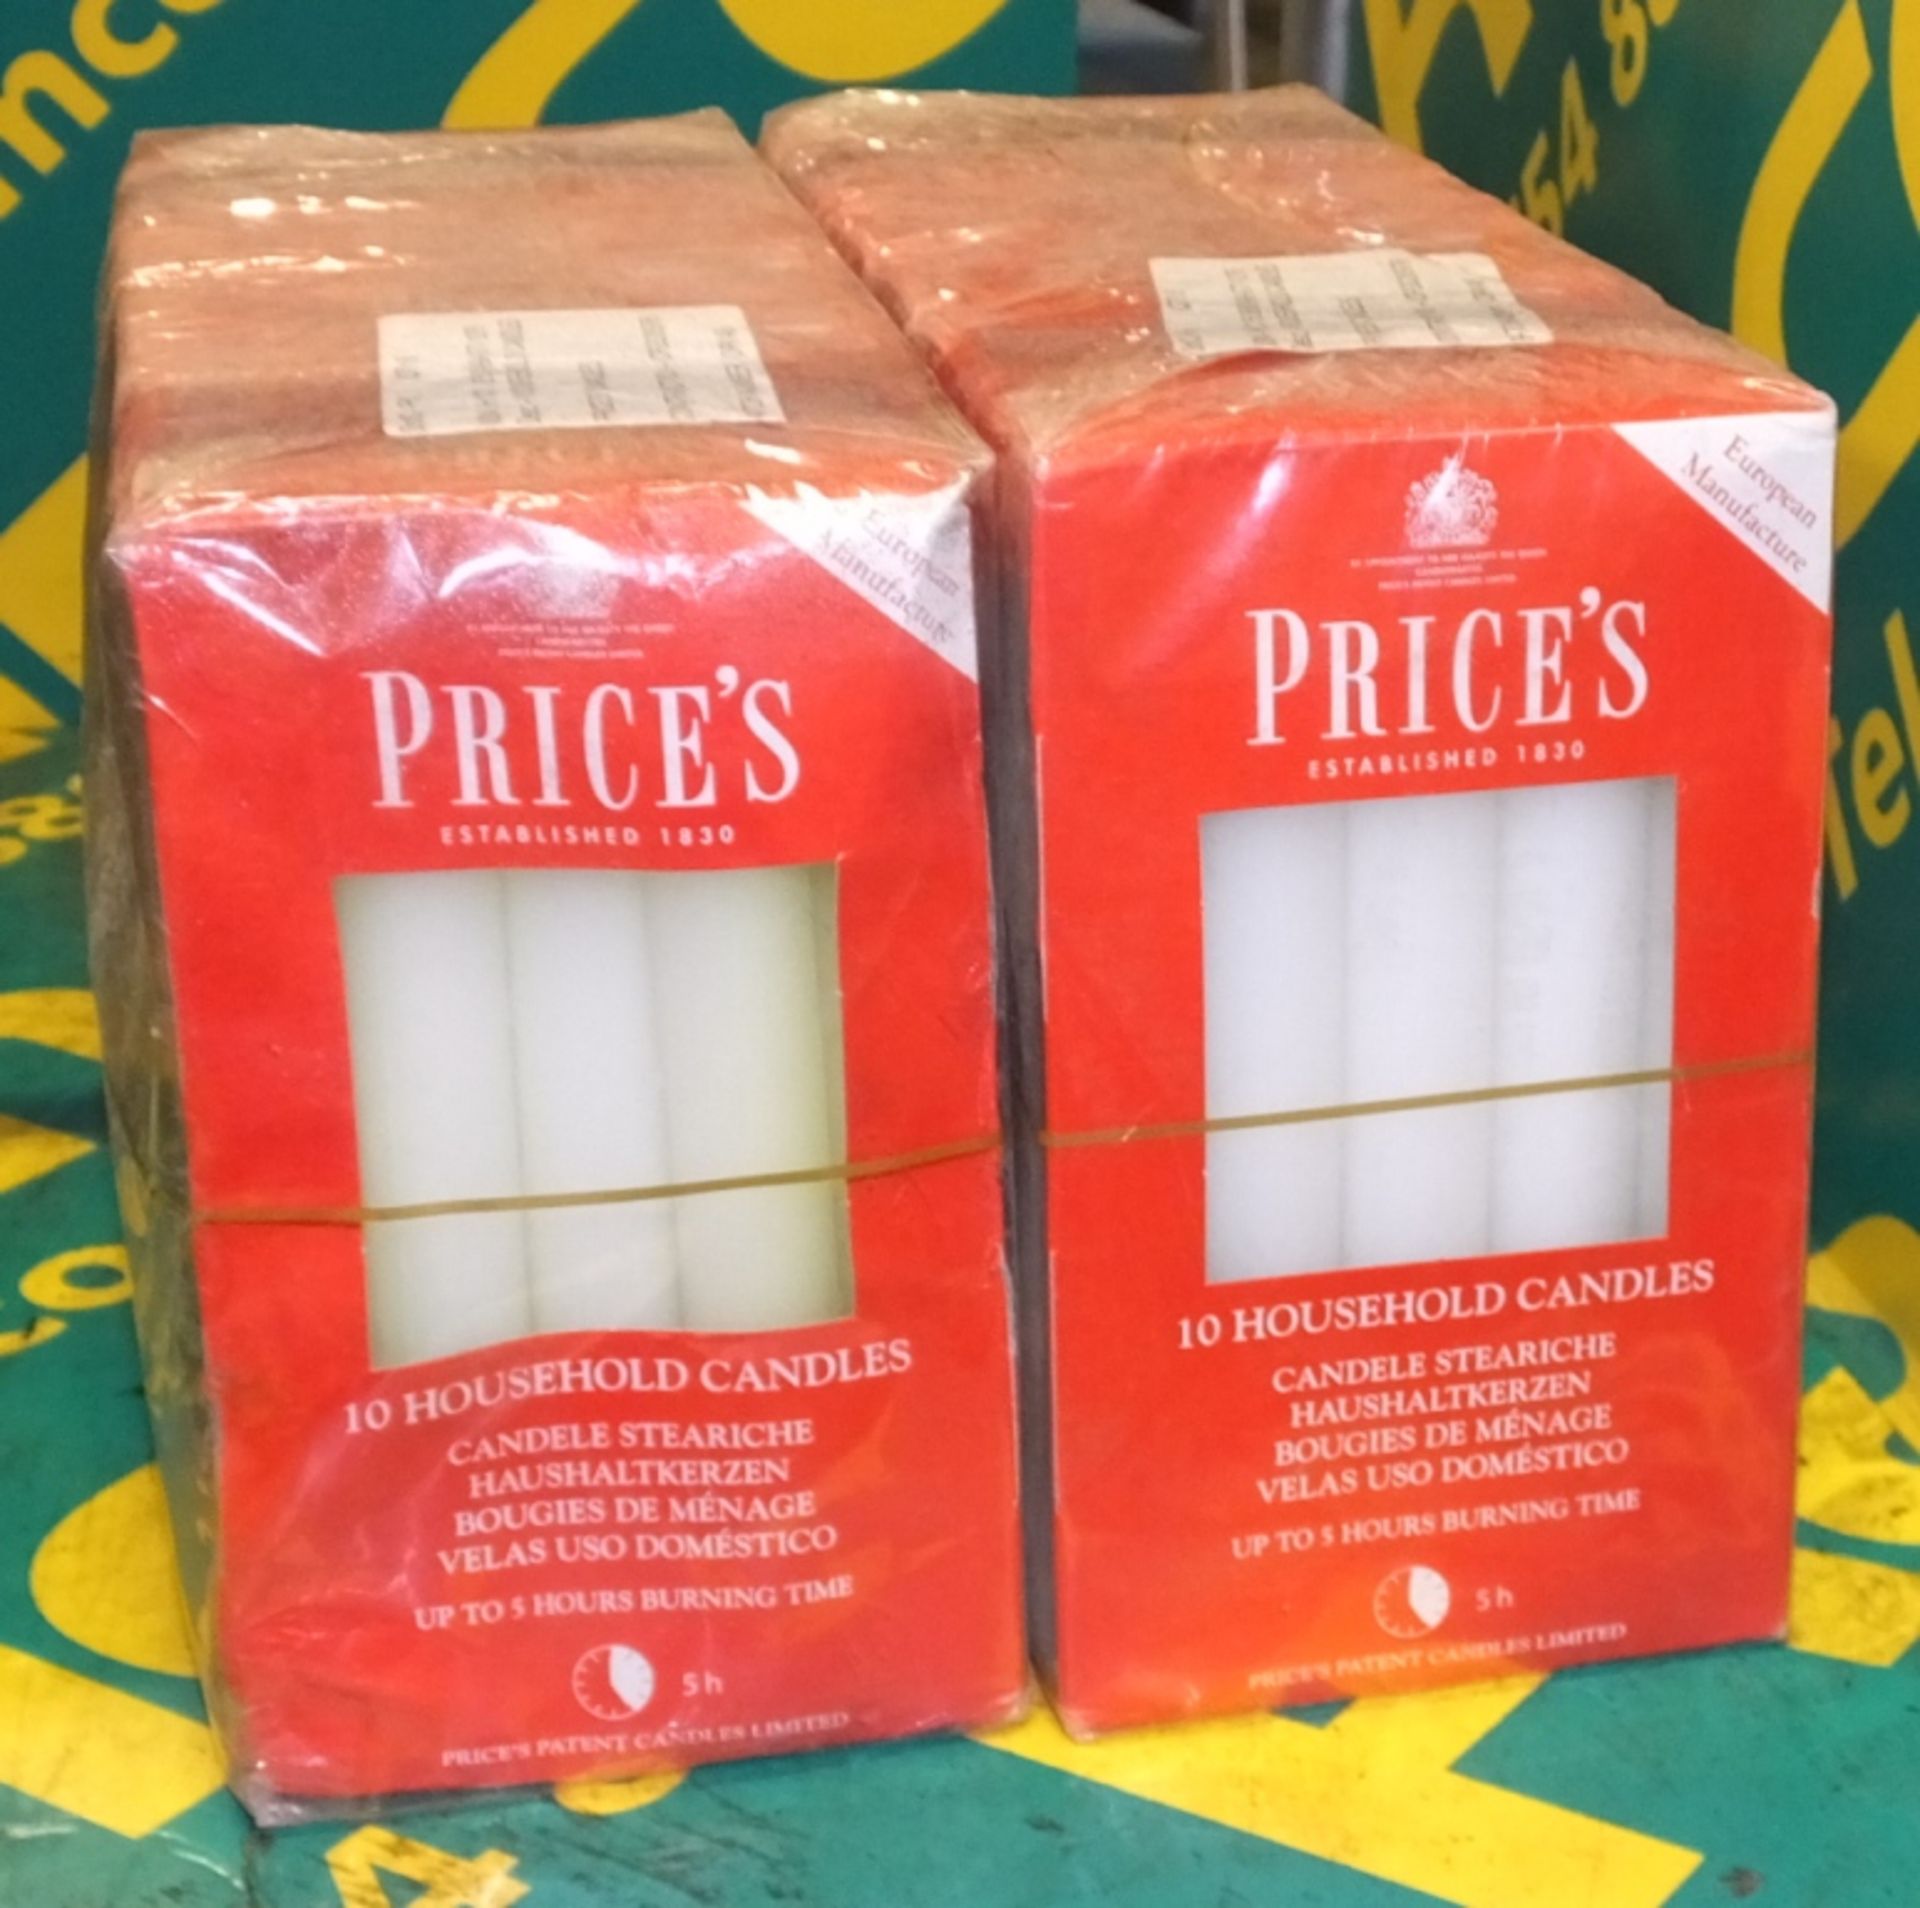 Prices Househpld Candles - 10 per box - 6 boxes per pack - 2 packs